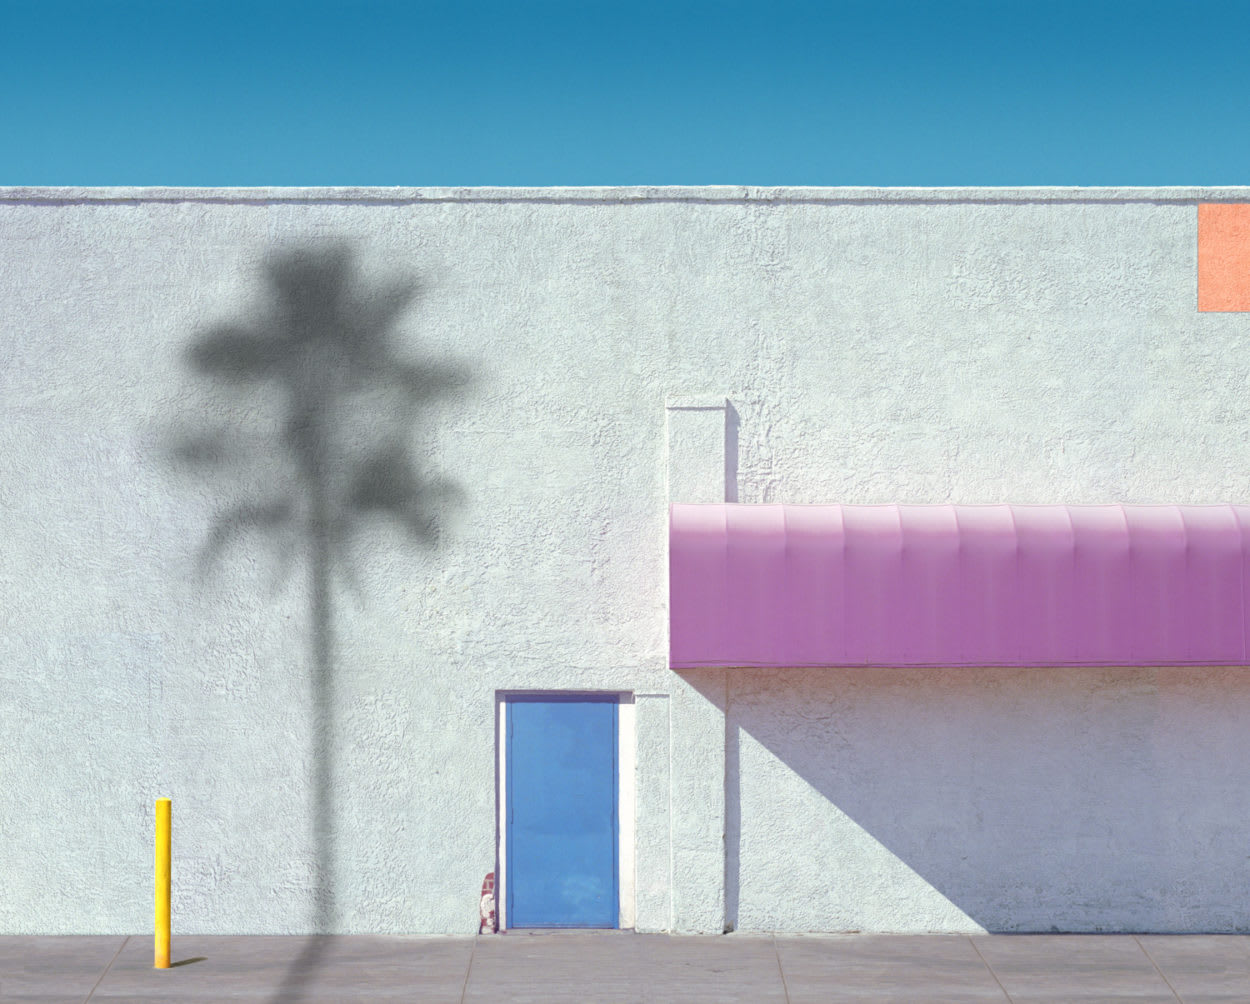 George Byrne’s L.A. is Beautifully Eerie – SURFACE